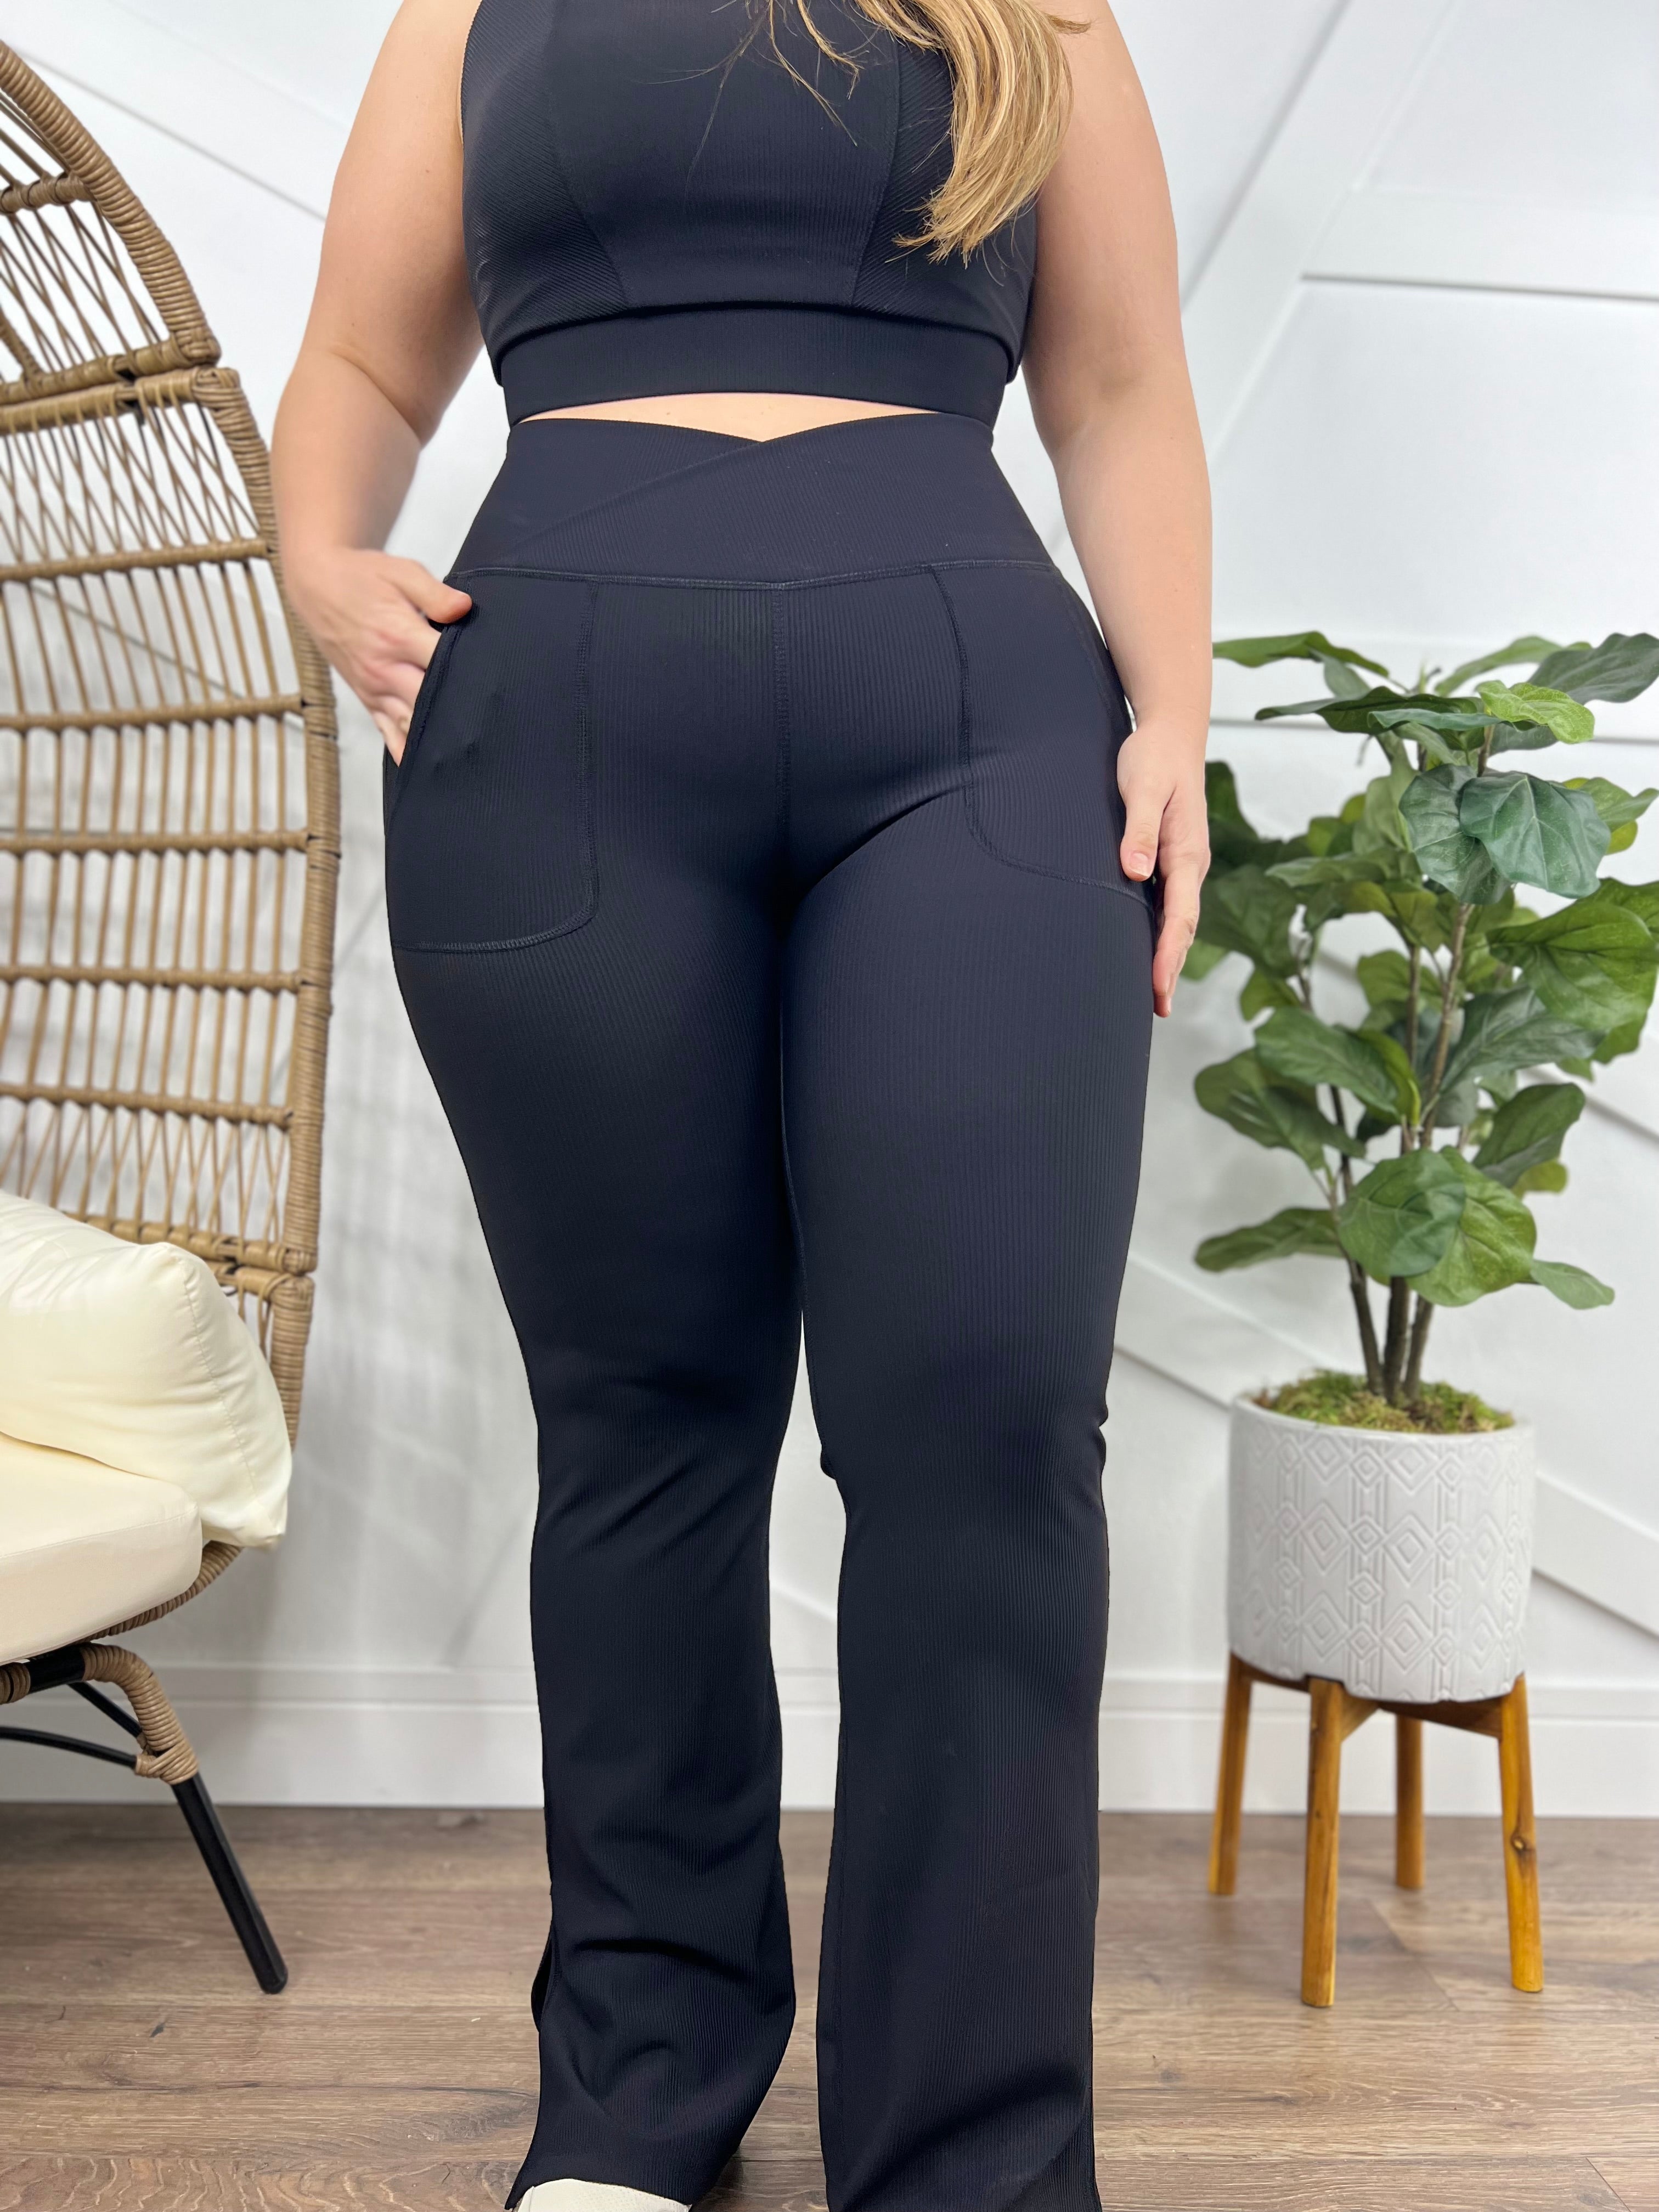 Restock: Mix It Up Leggings-180 LEGGINGS-Rae Mode-Heathered Boho Boutique, Women's Fashion and Accessories in Palmetto, FL